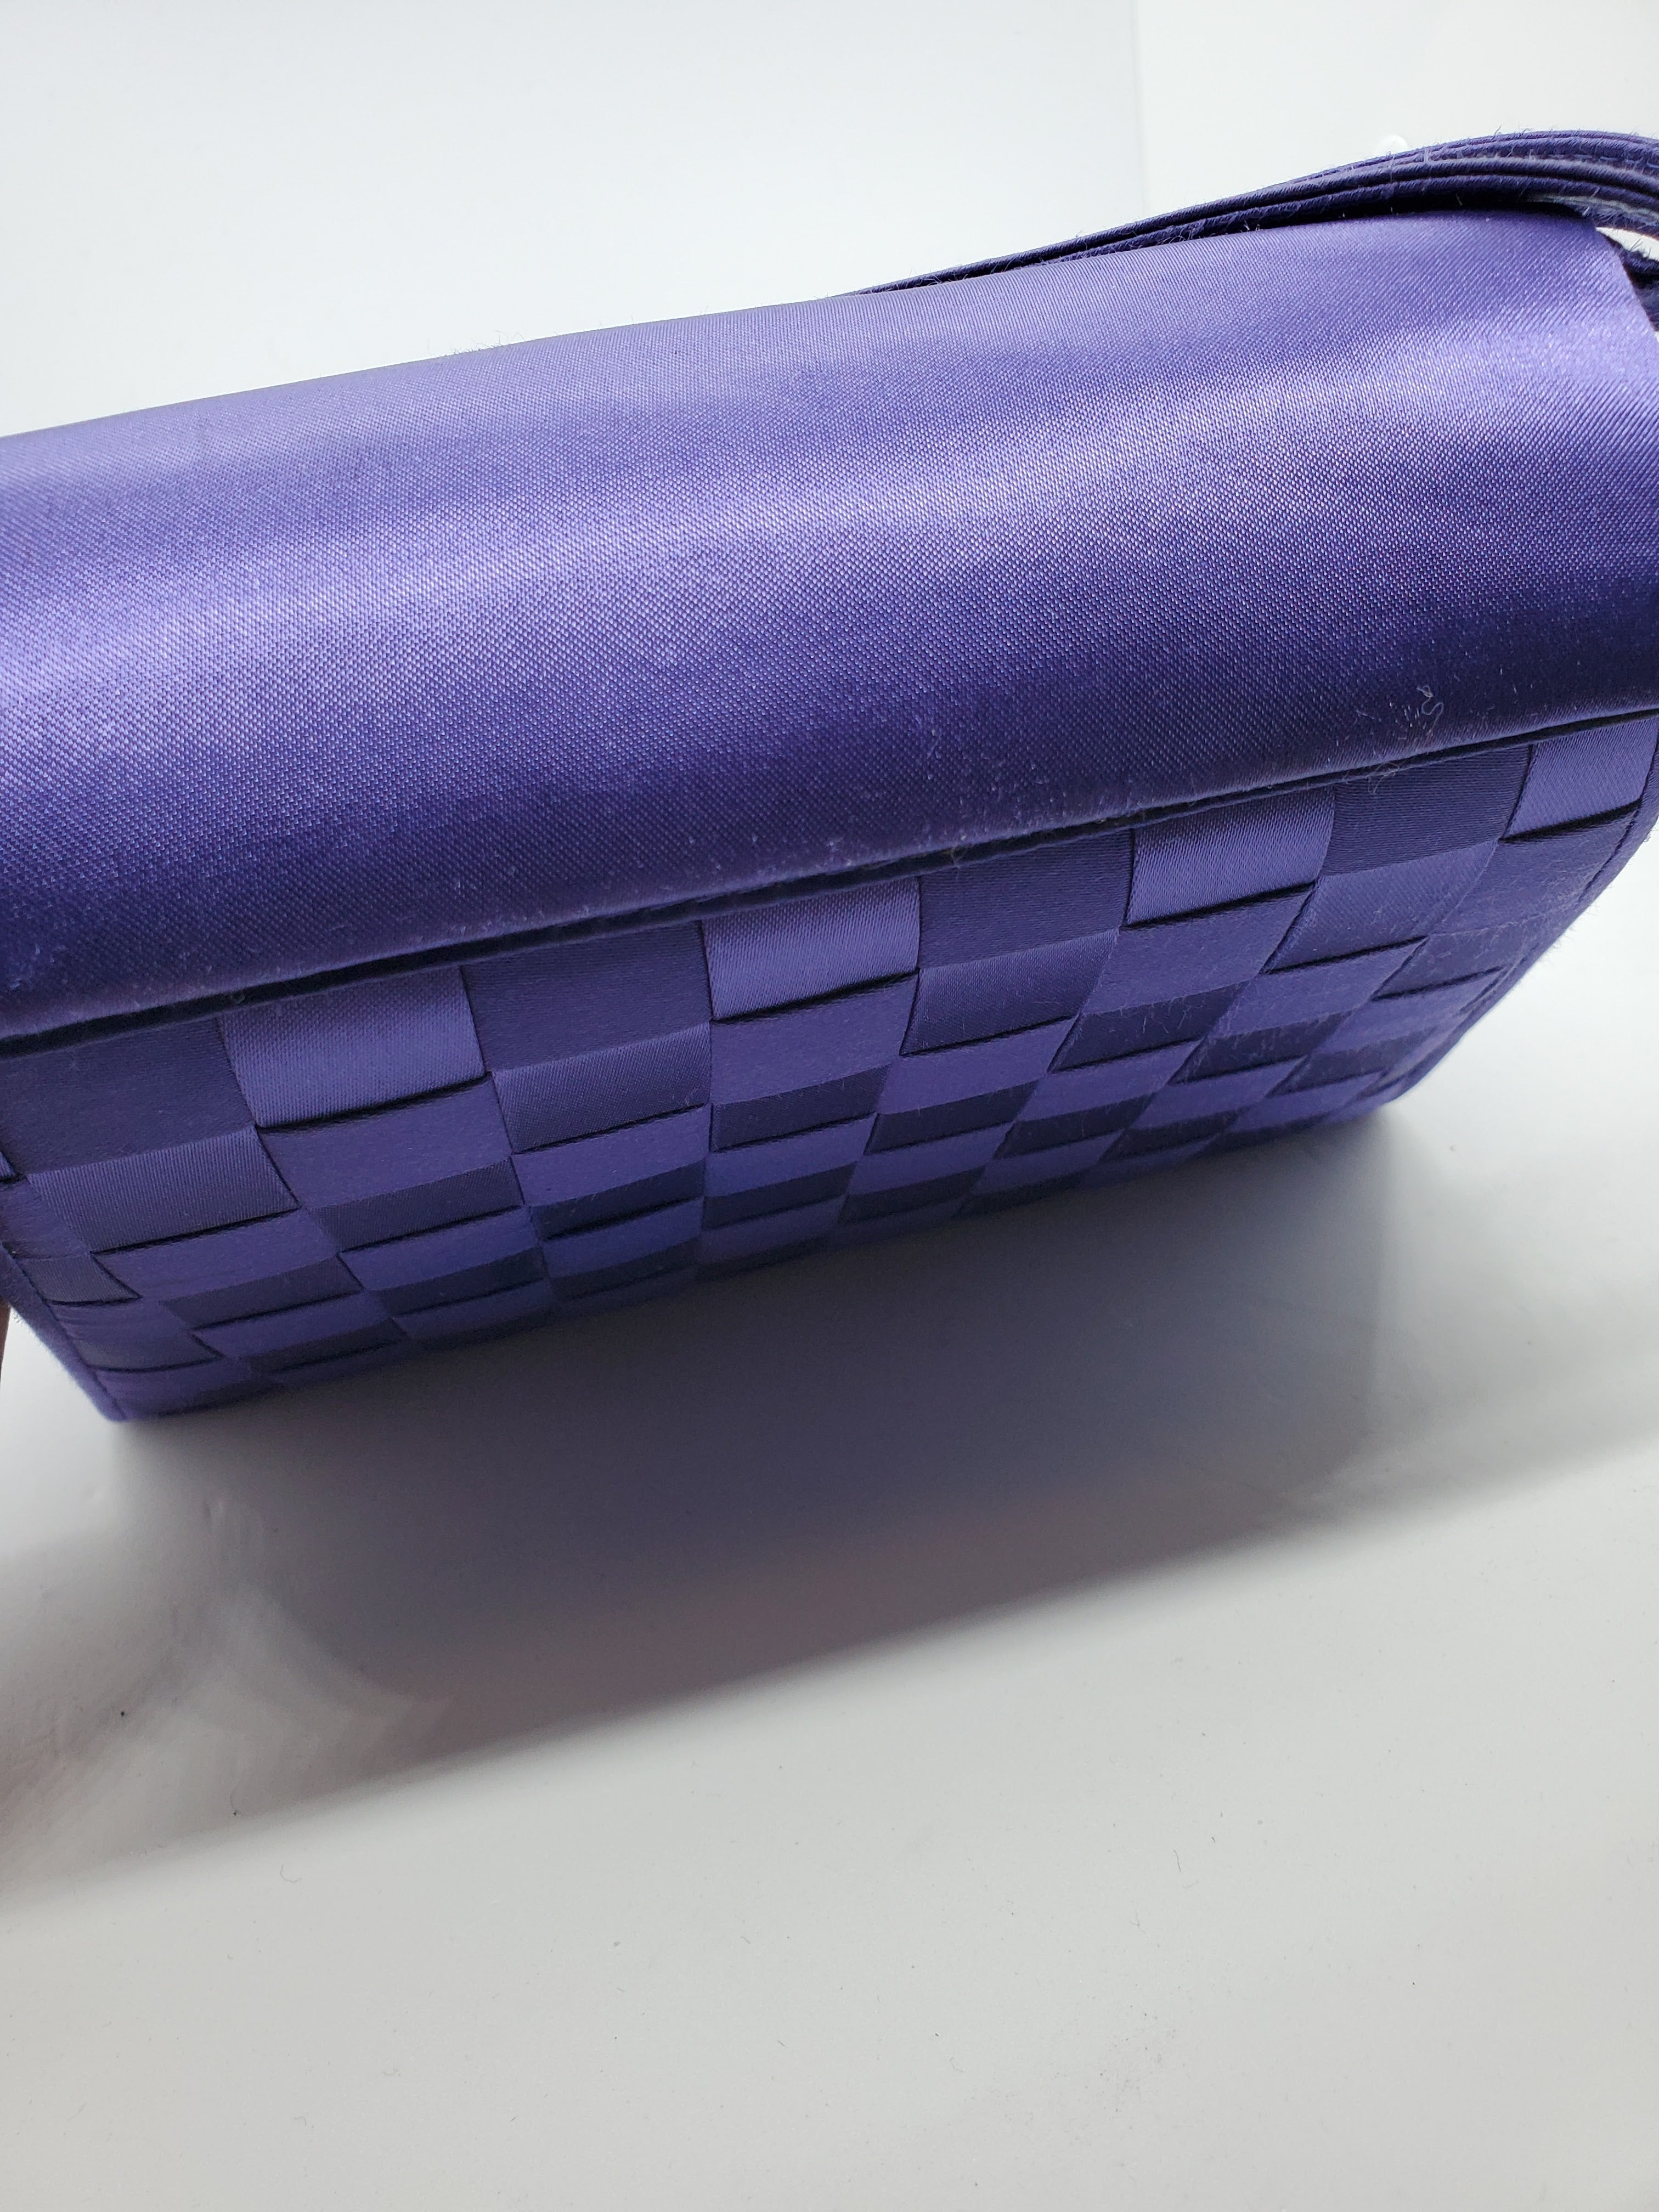 top view of purple handbag with woven details